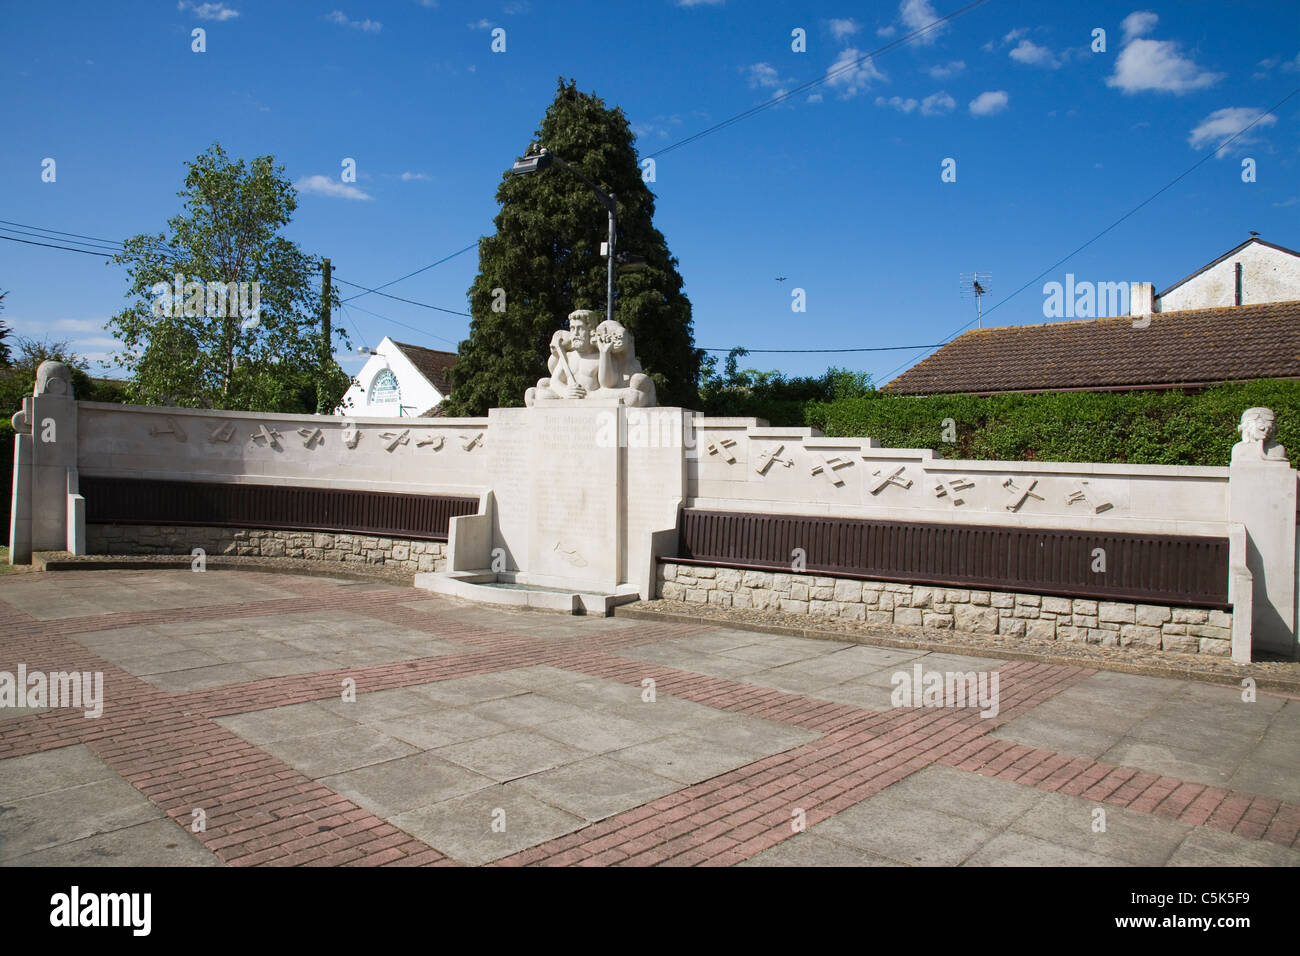 The memorial to British Aviation in Eastchurch, Isle of Sheppey, Kent, England. Stock Photo